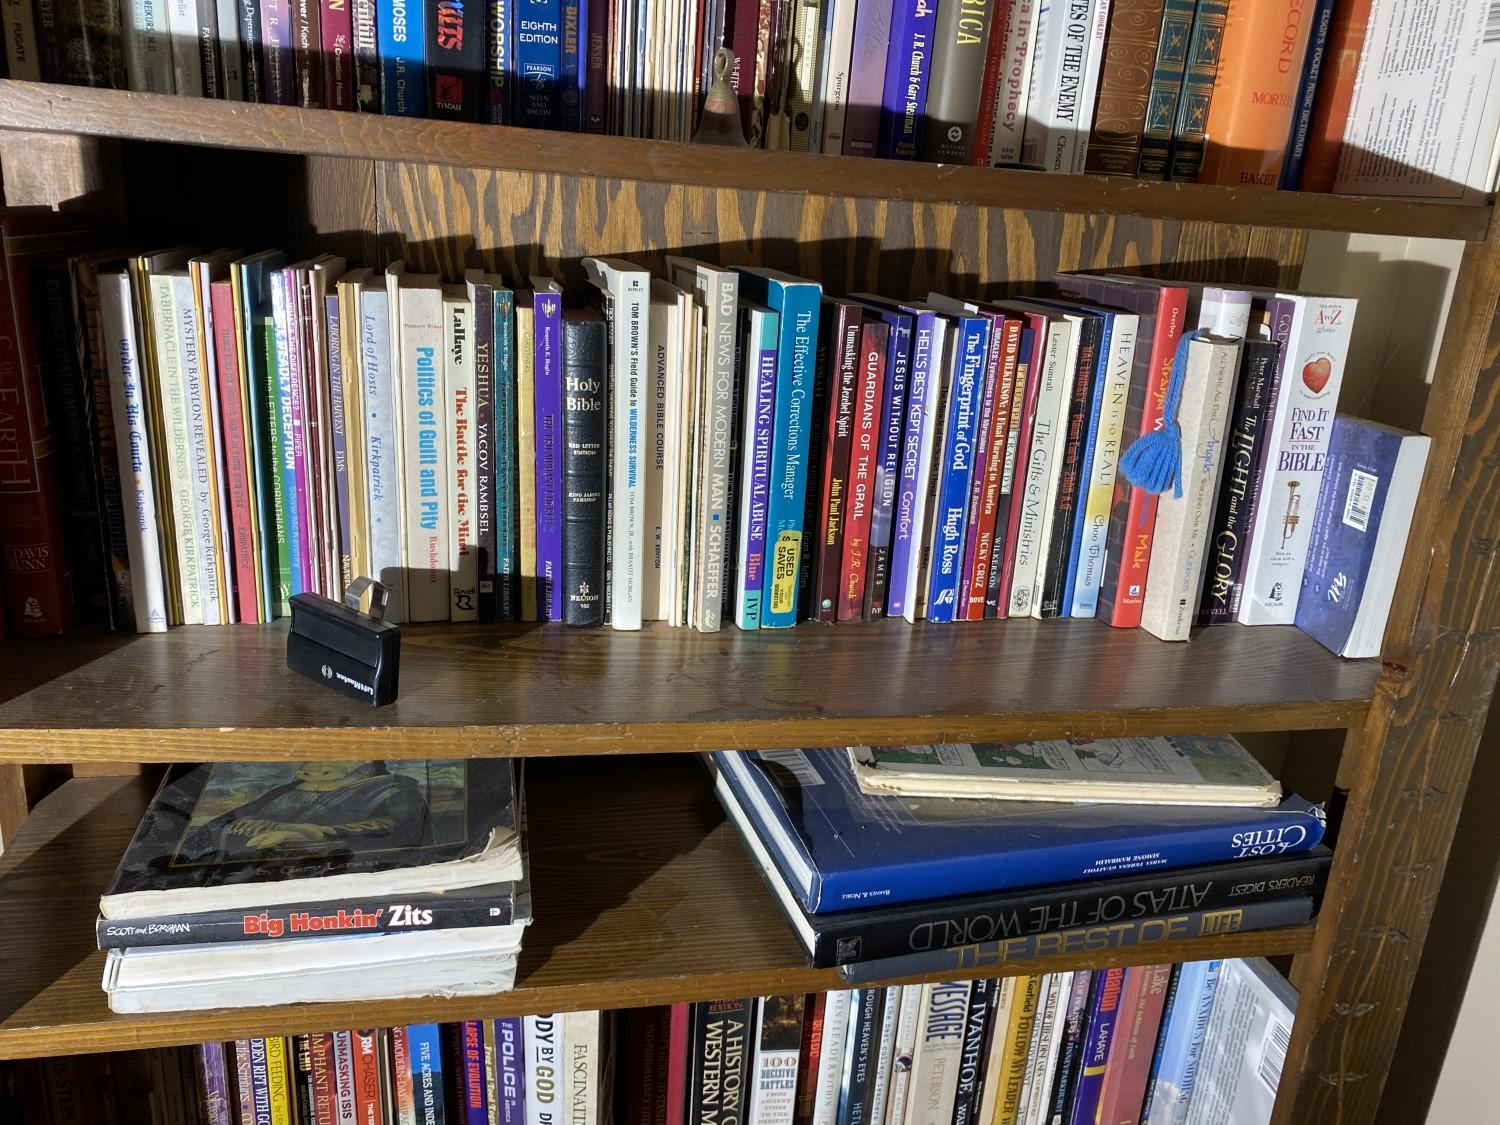 Contents of three shelves - books